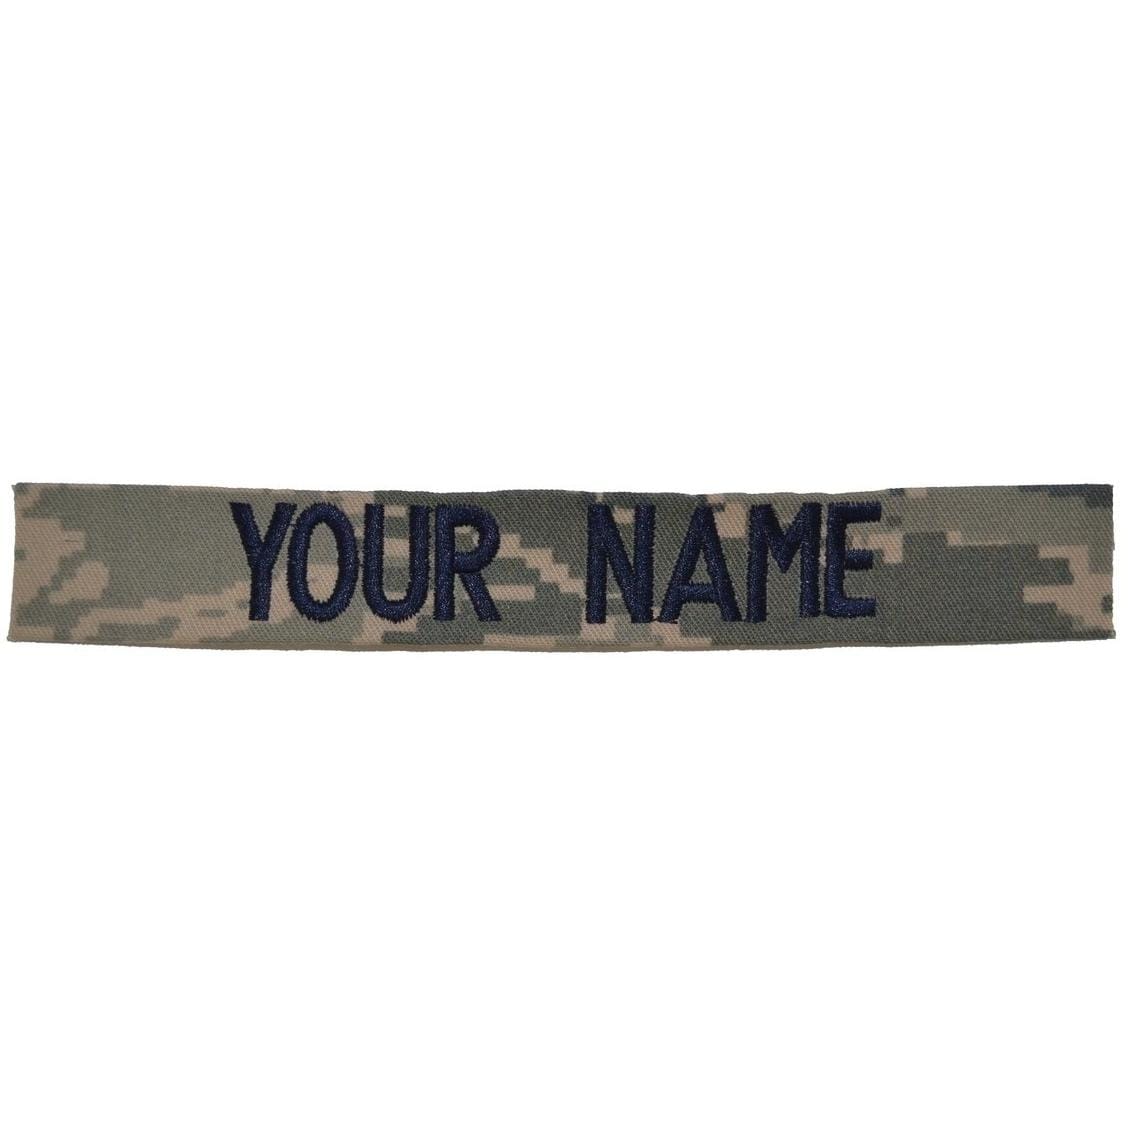 Custom Uniform Military Embroidered Name Tape with Hook Fastener or Sew-On, Military Name Patches (Abu Air Force, with Fastener)